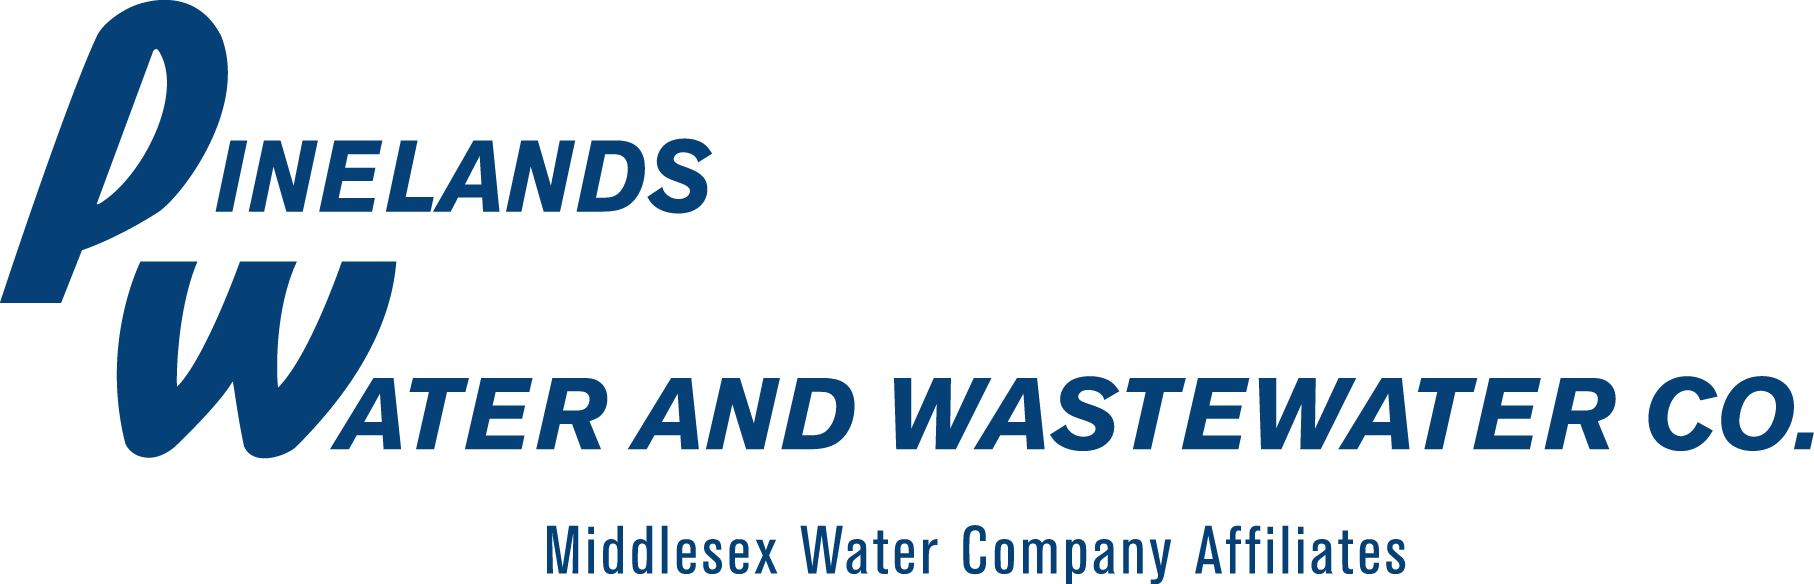 Pinelands Water and Wastewater Co.